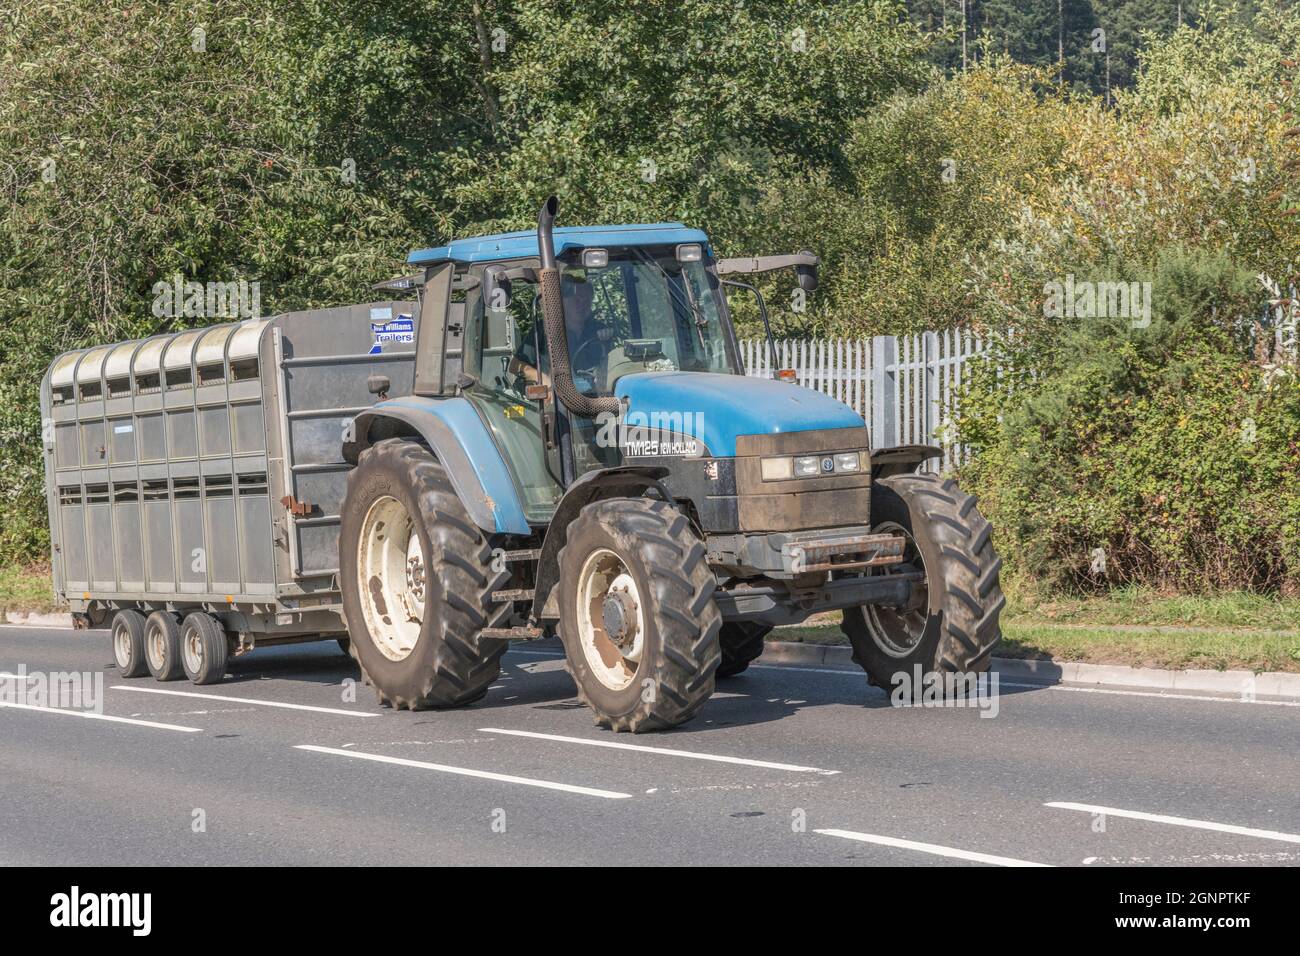 Blue New Holland TM125 farm tractor on open country rural road, pulling cattle / livestock trailer uphill. New Holland is an American company. Stock Photo